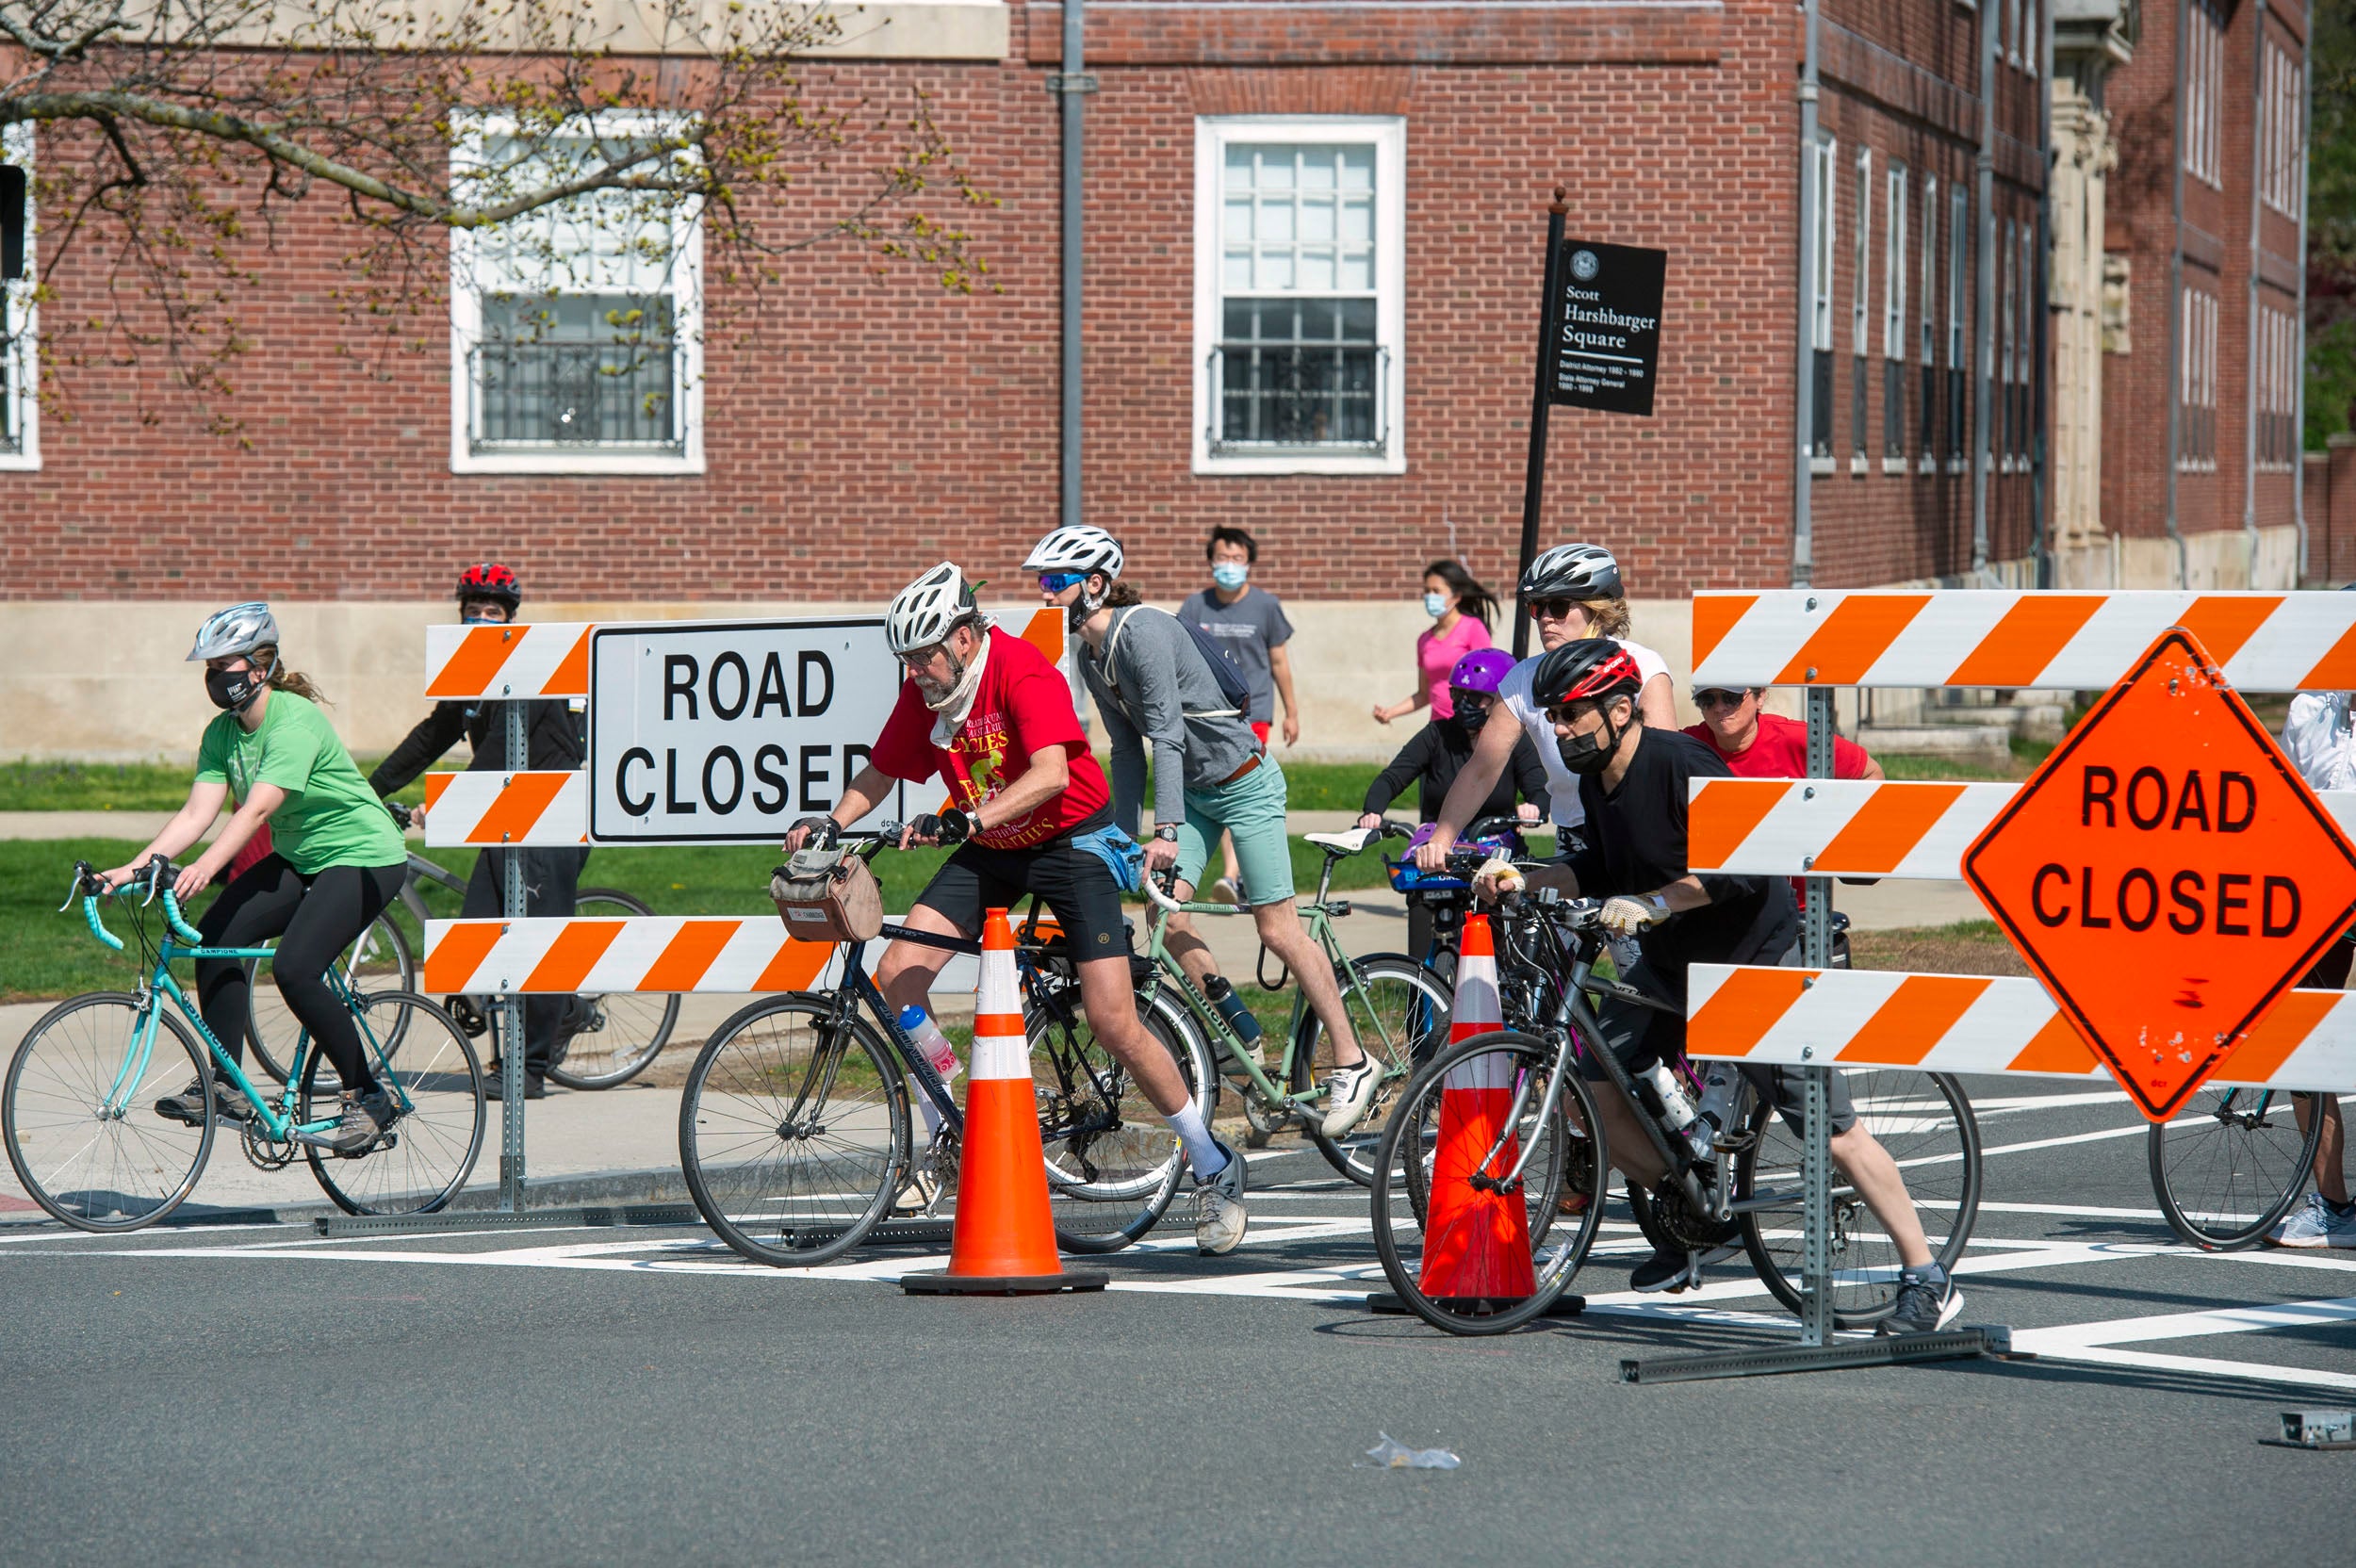 Bicyclists wait for the light at JFK Street next to a barricade on Mem Drive.